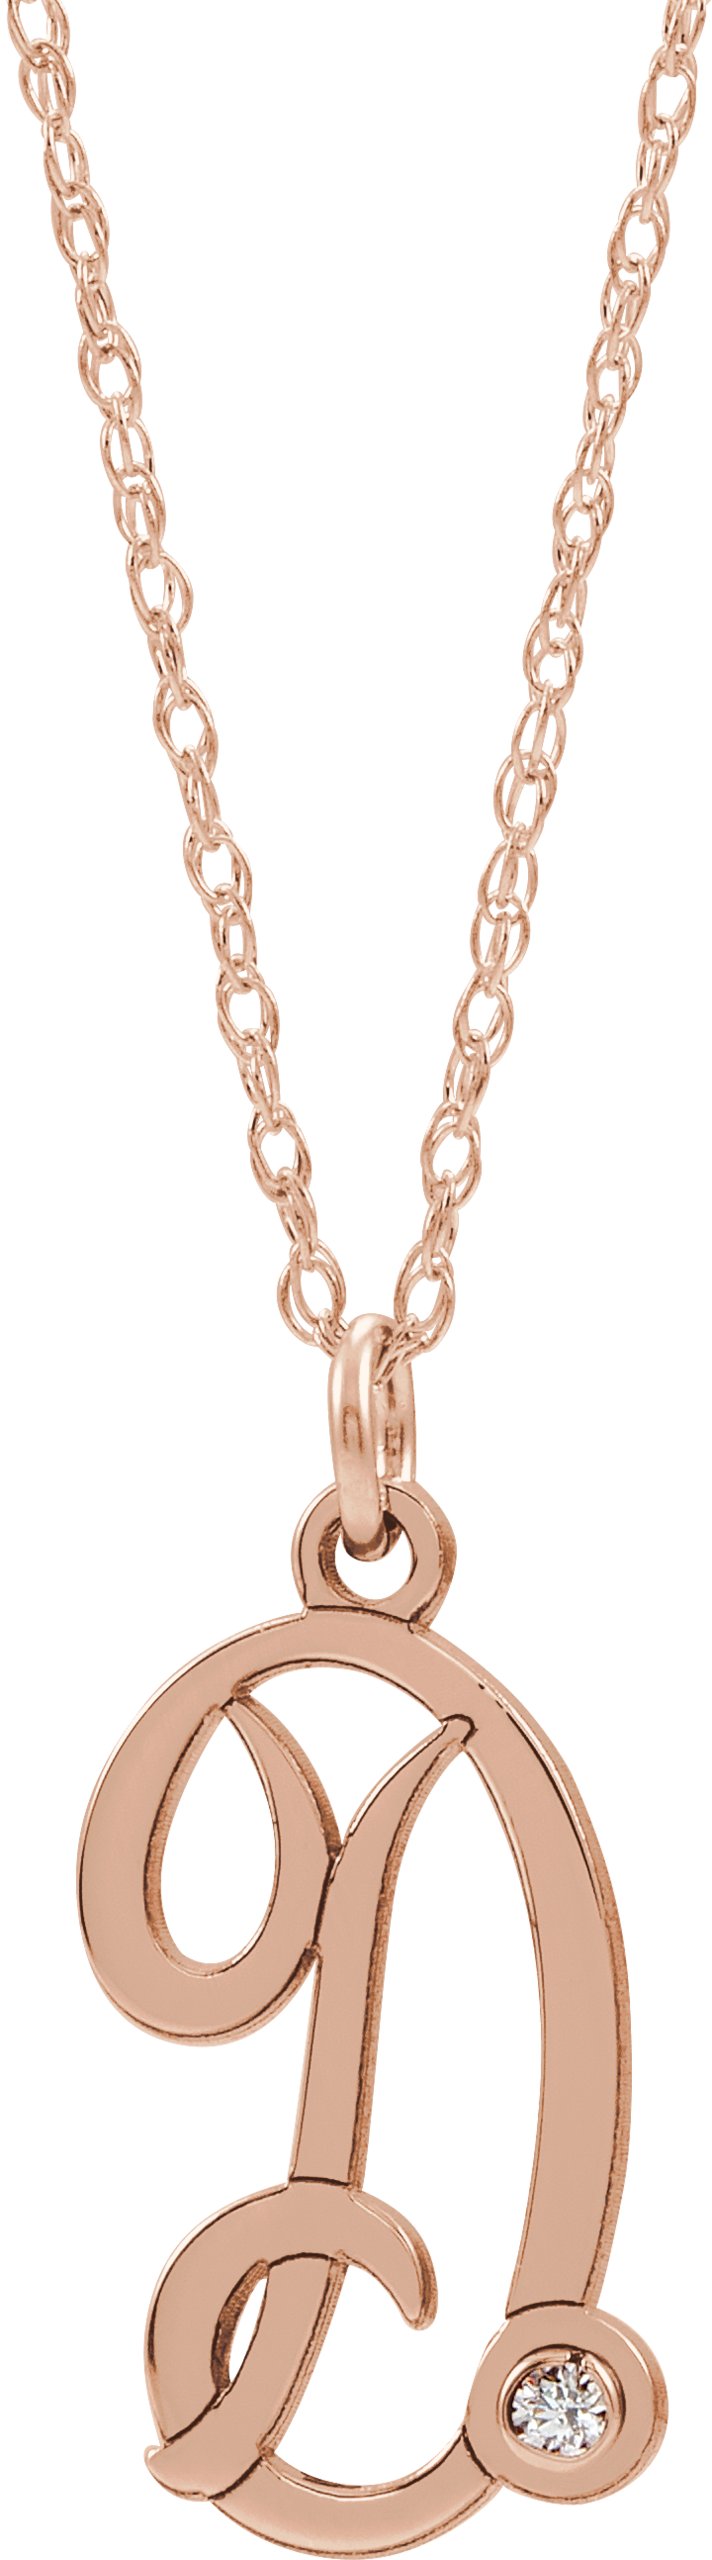 14K Rose Gold-Plated Sterling Silver .02 CT Diamond Script Initial D 16-18" Necklace